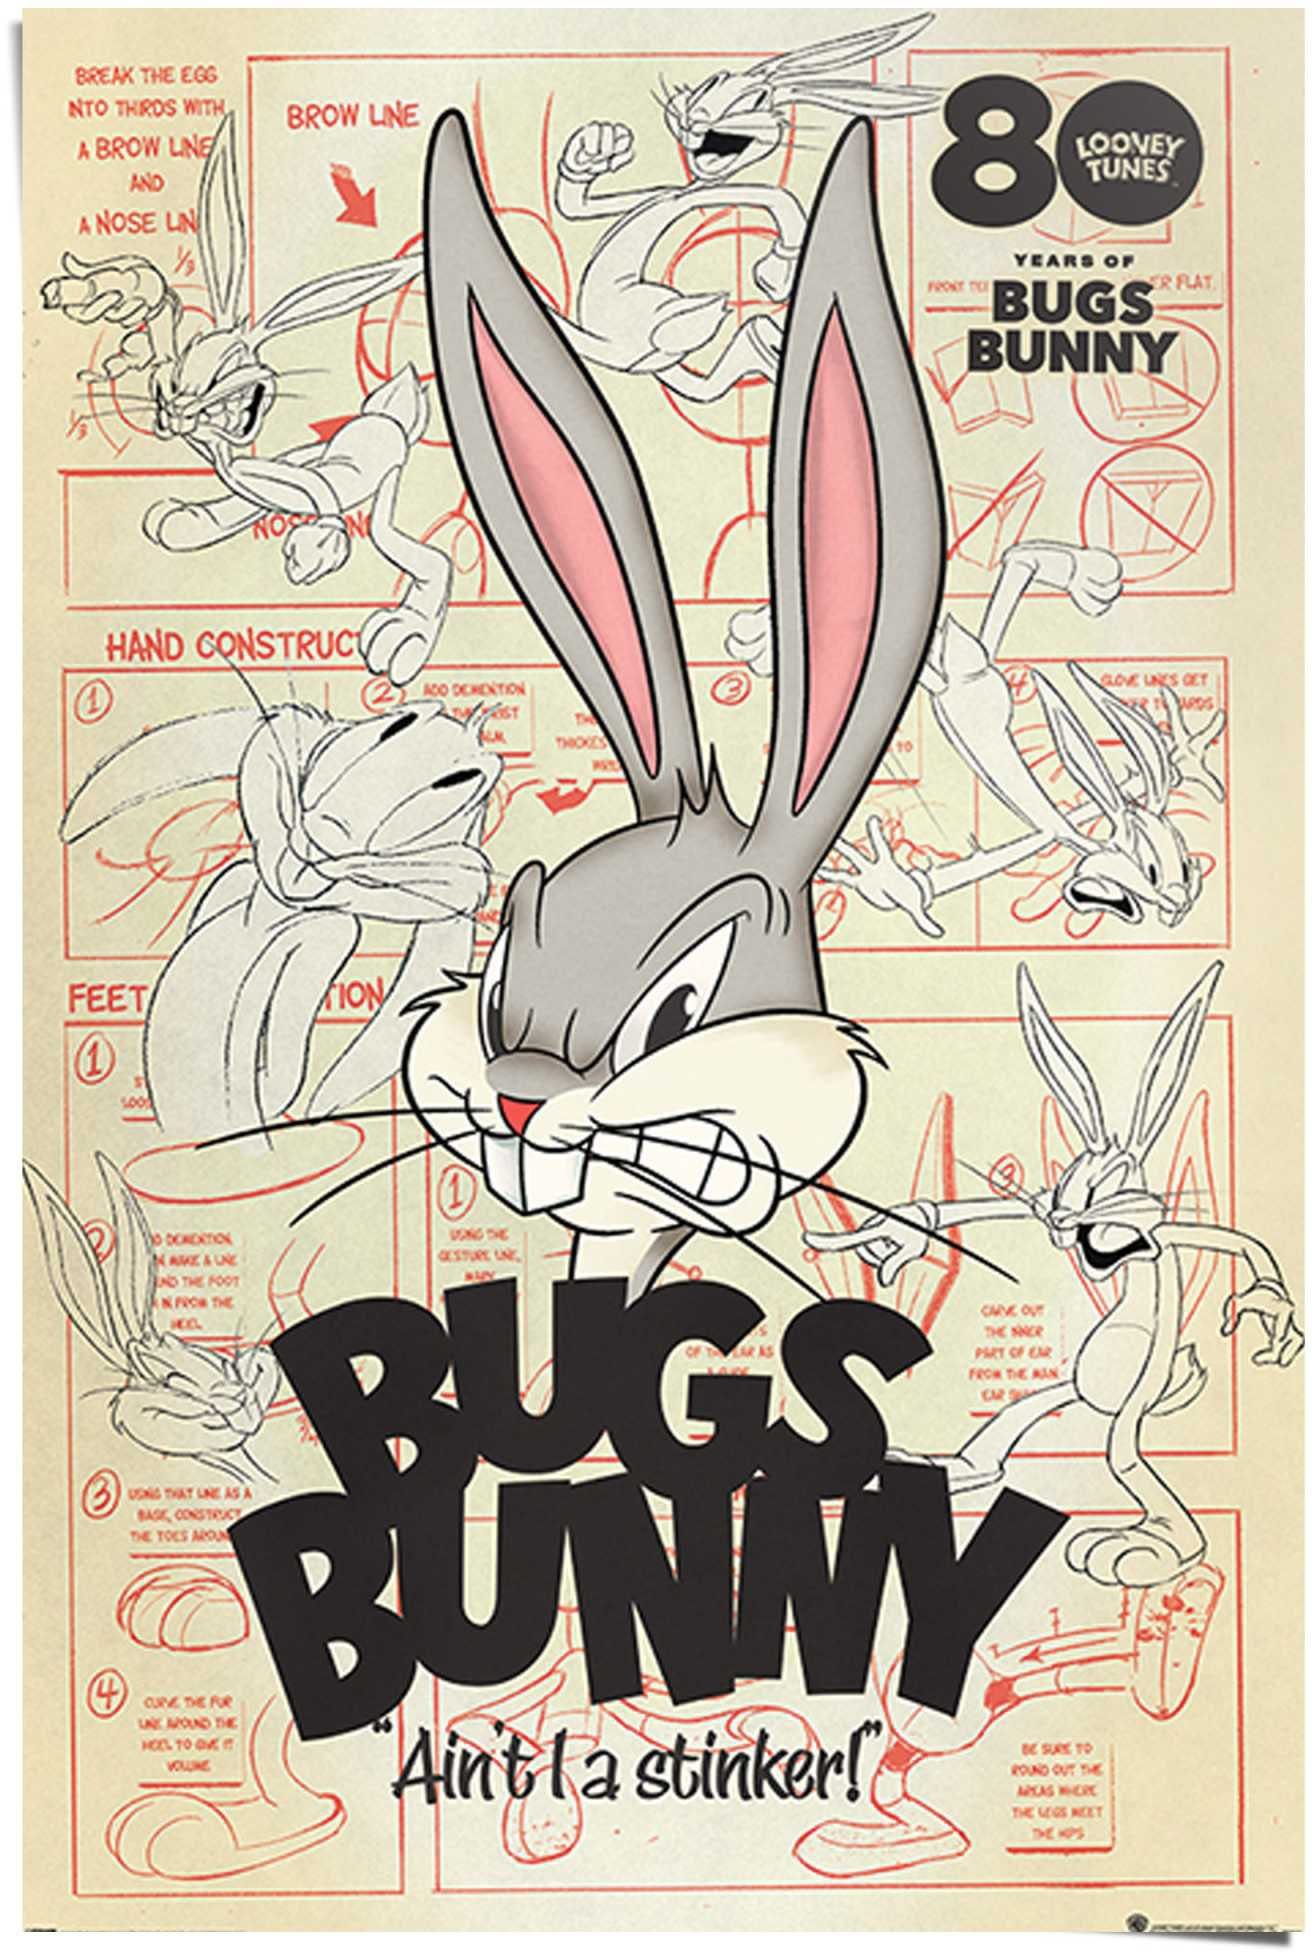 (1 Looney Bunny - - Bros Warner Poster I Bugs Tunes ait stinker St) Reinders! a Hase,